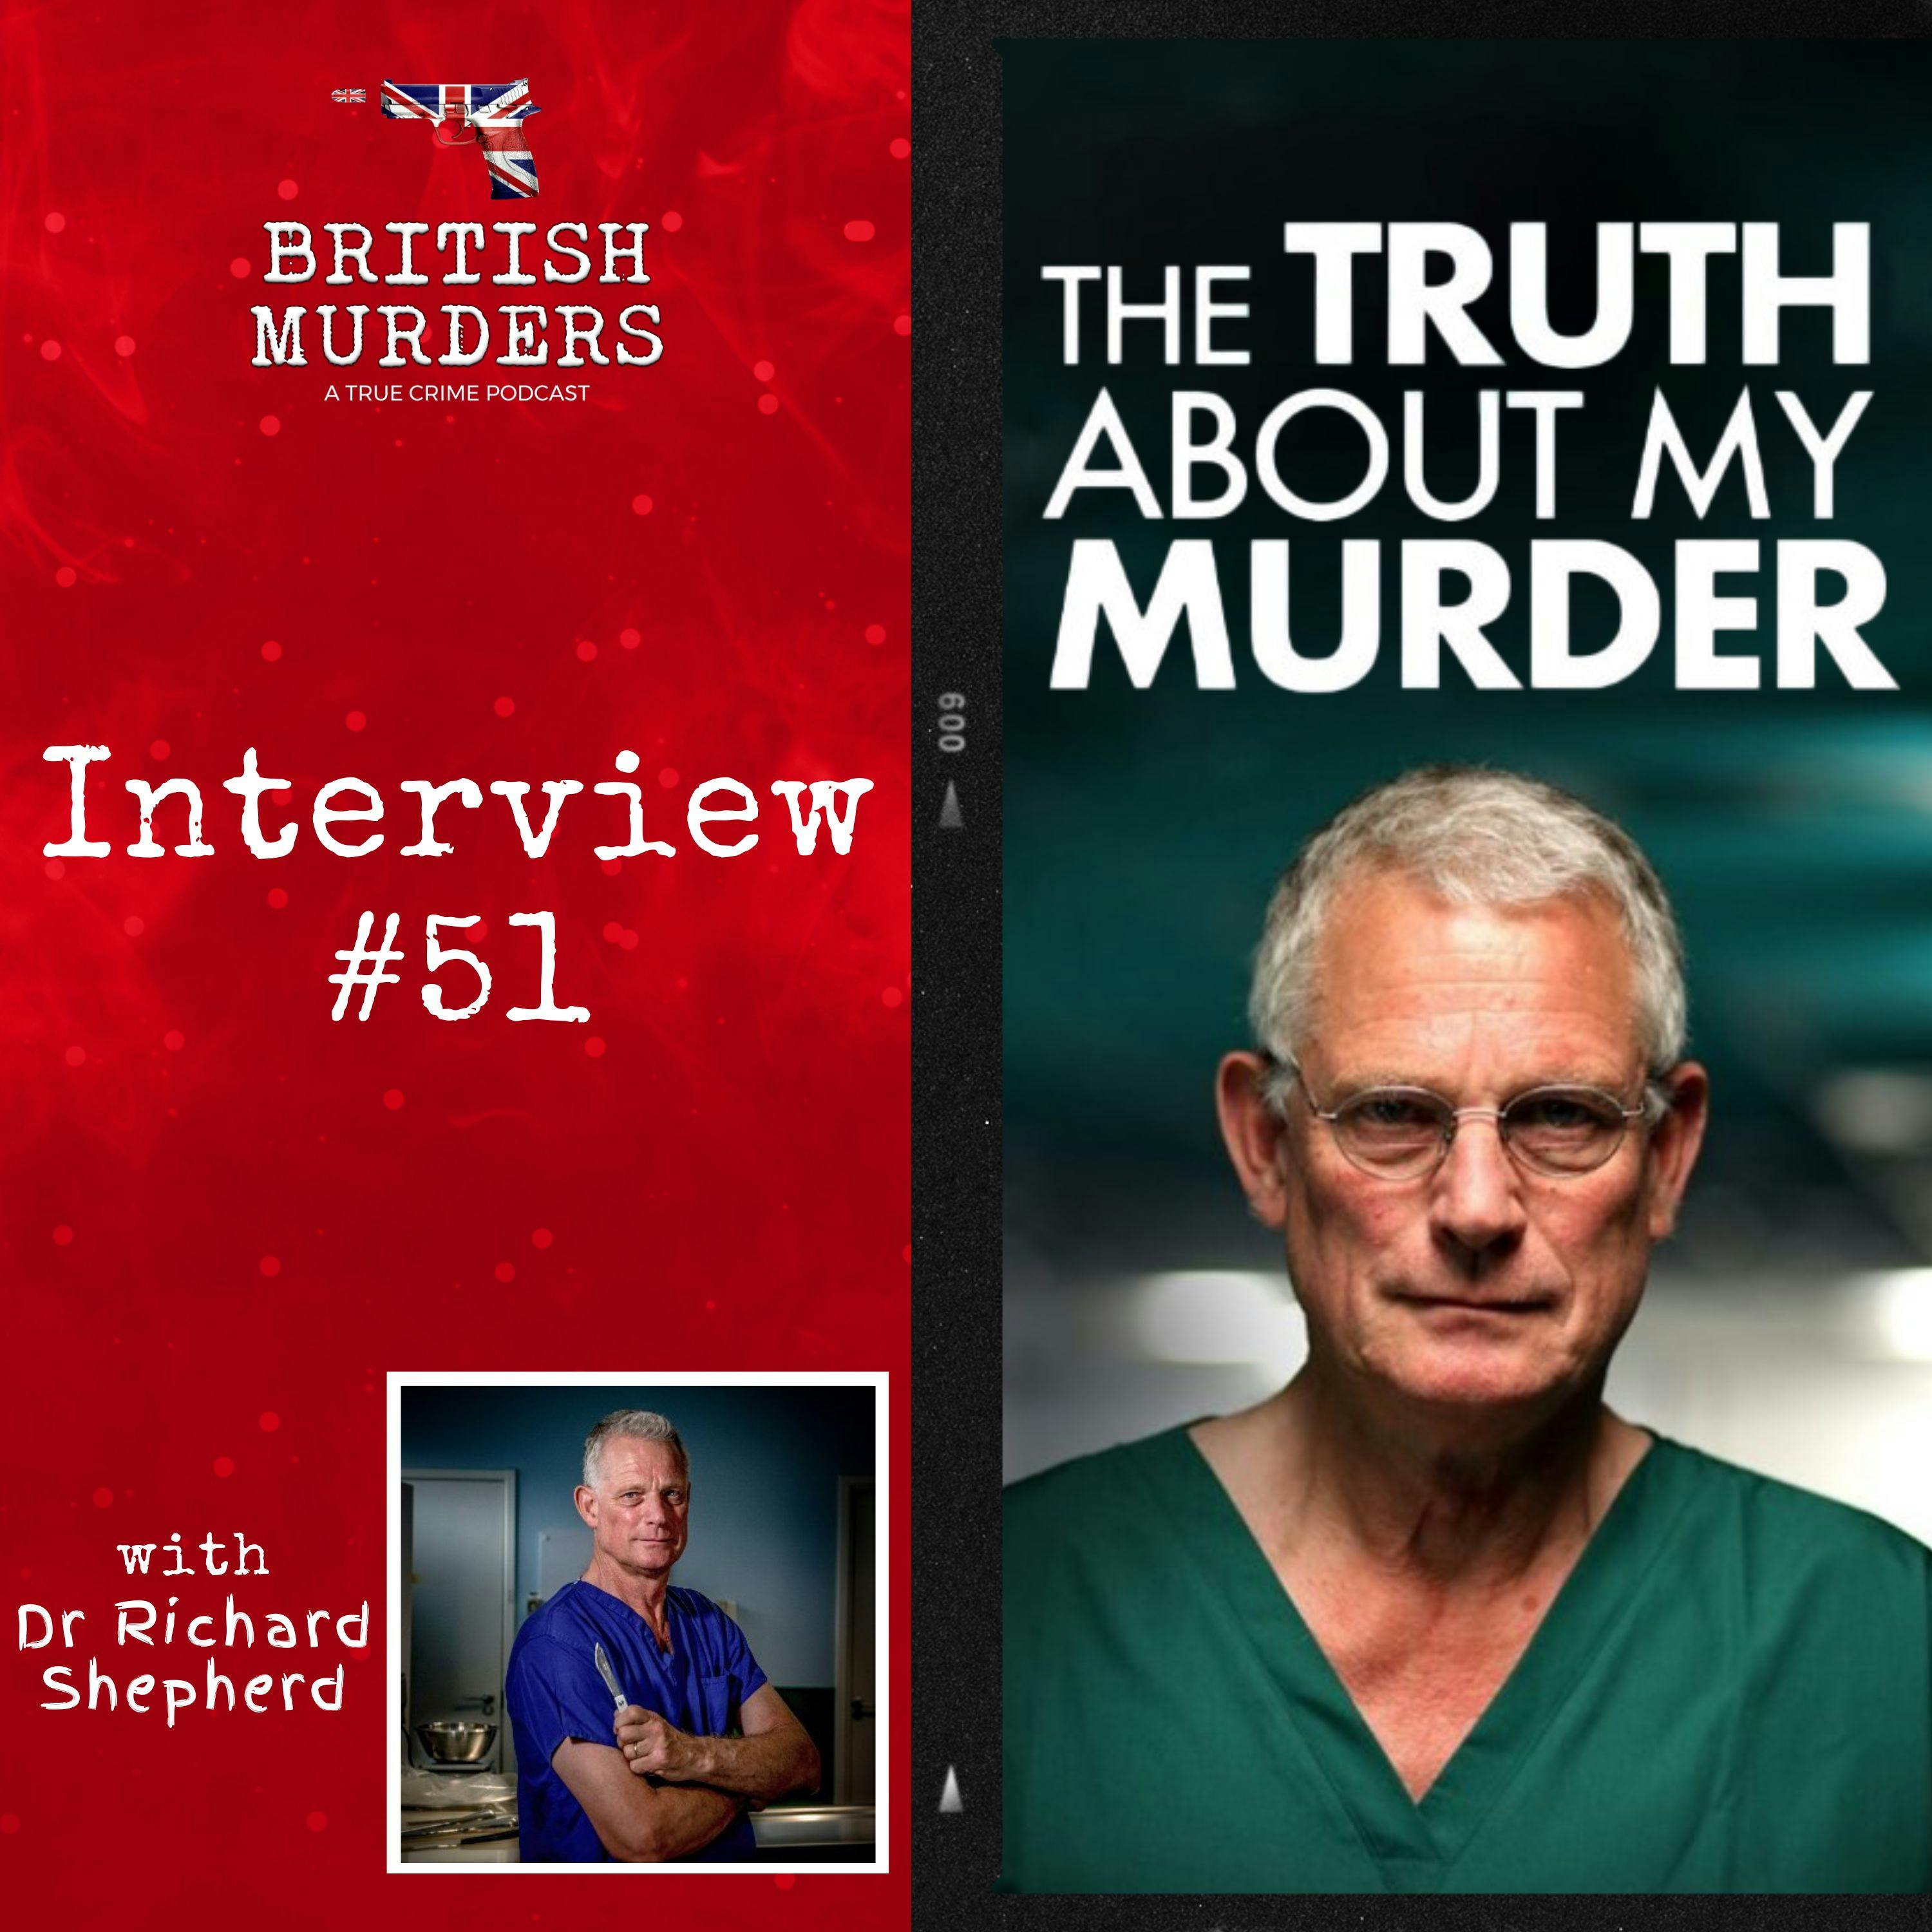 Interview #51 | The Truth About My Murder: Dr Richard Shepherd discusses the TRUE CRIME original series' second season